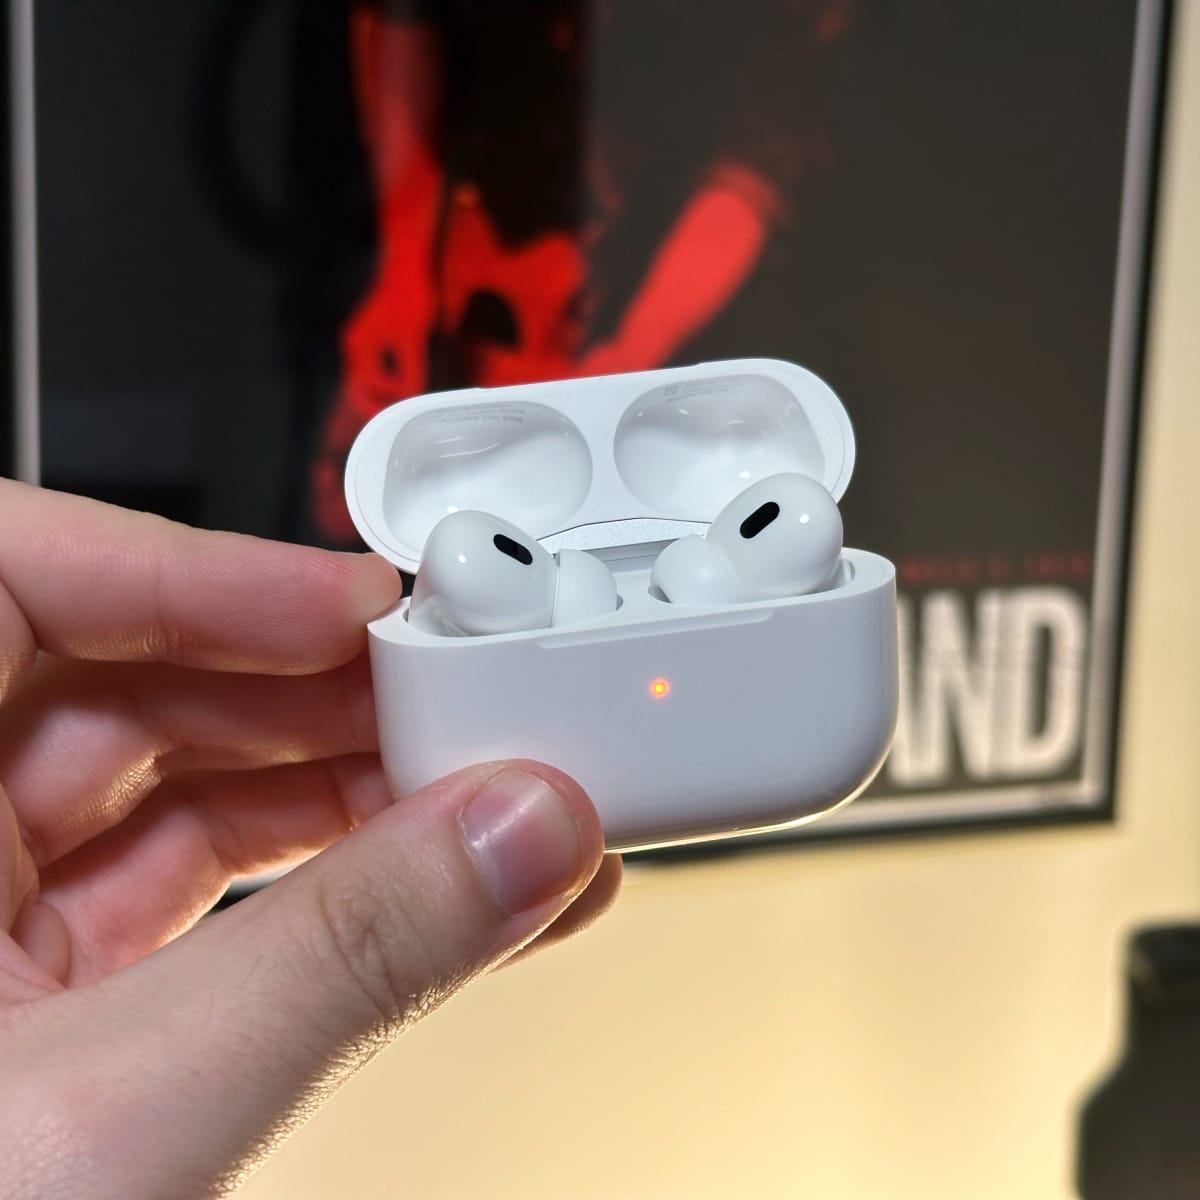 Apple AirPods Pro 2nd Gen review